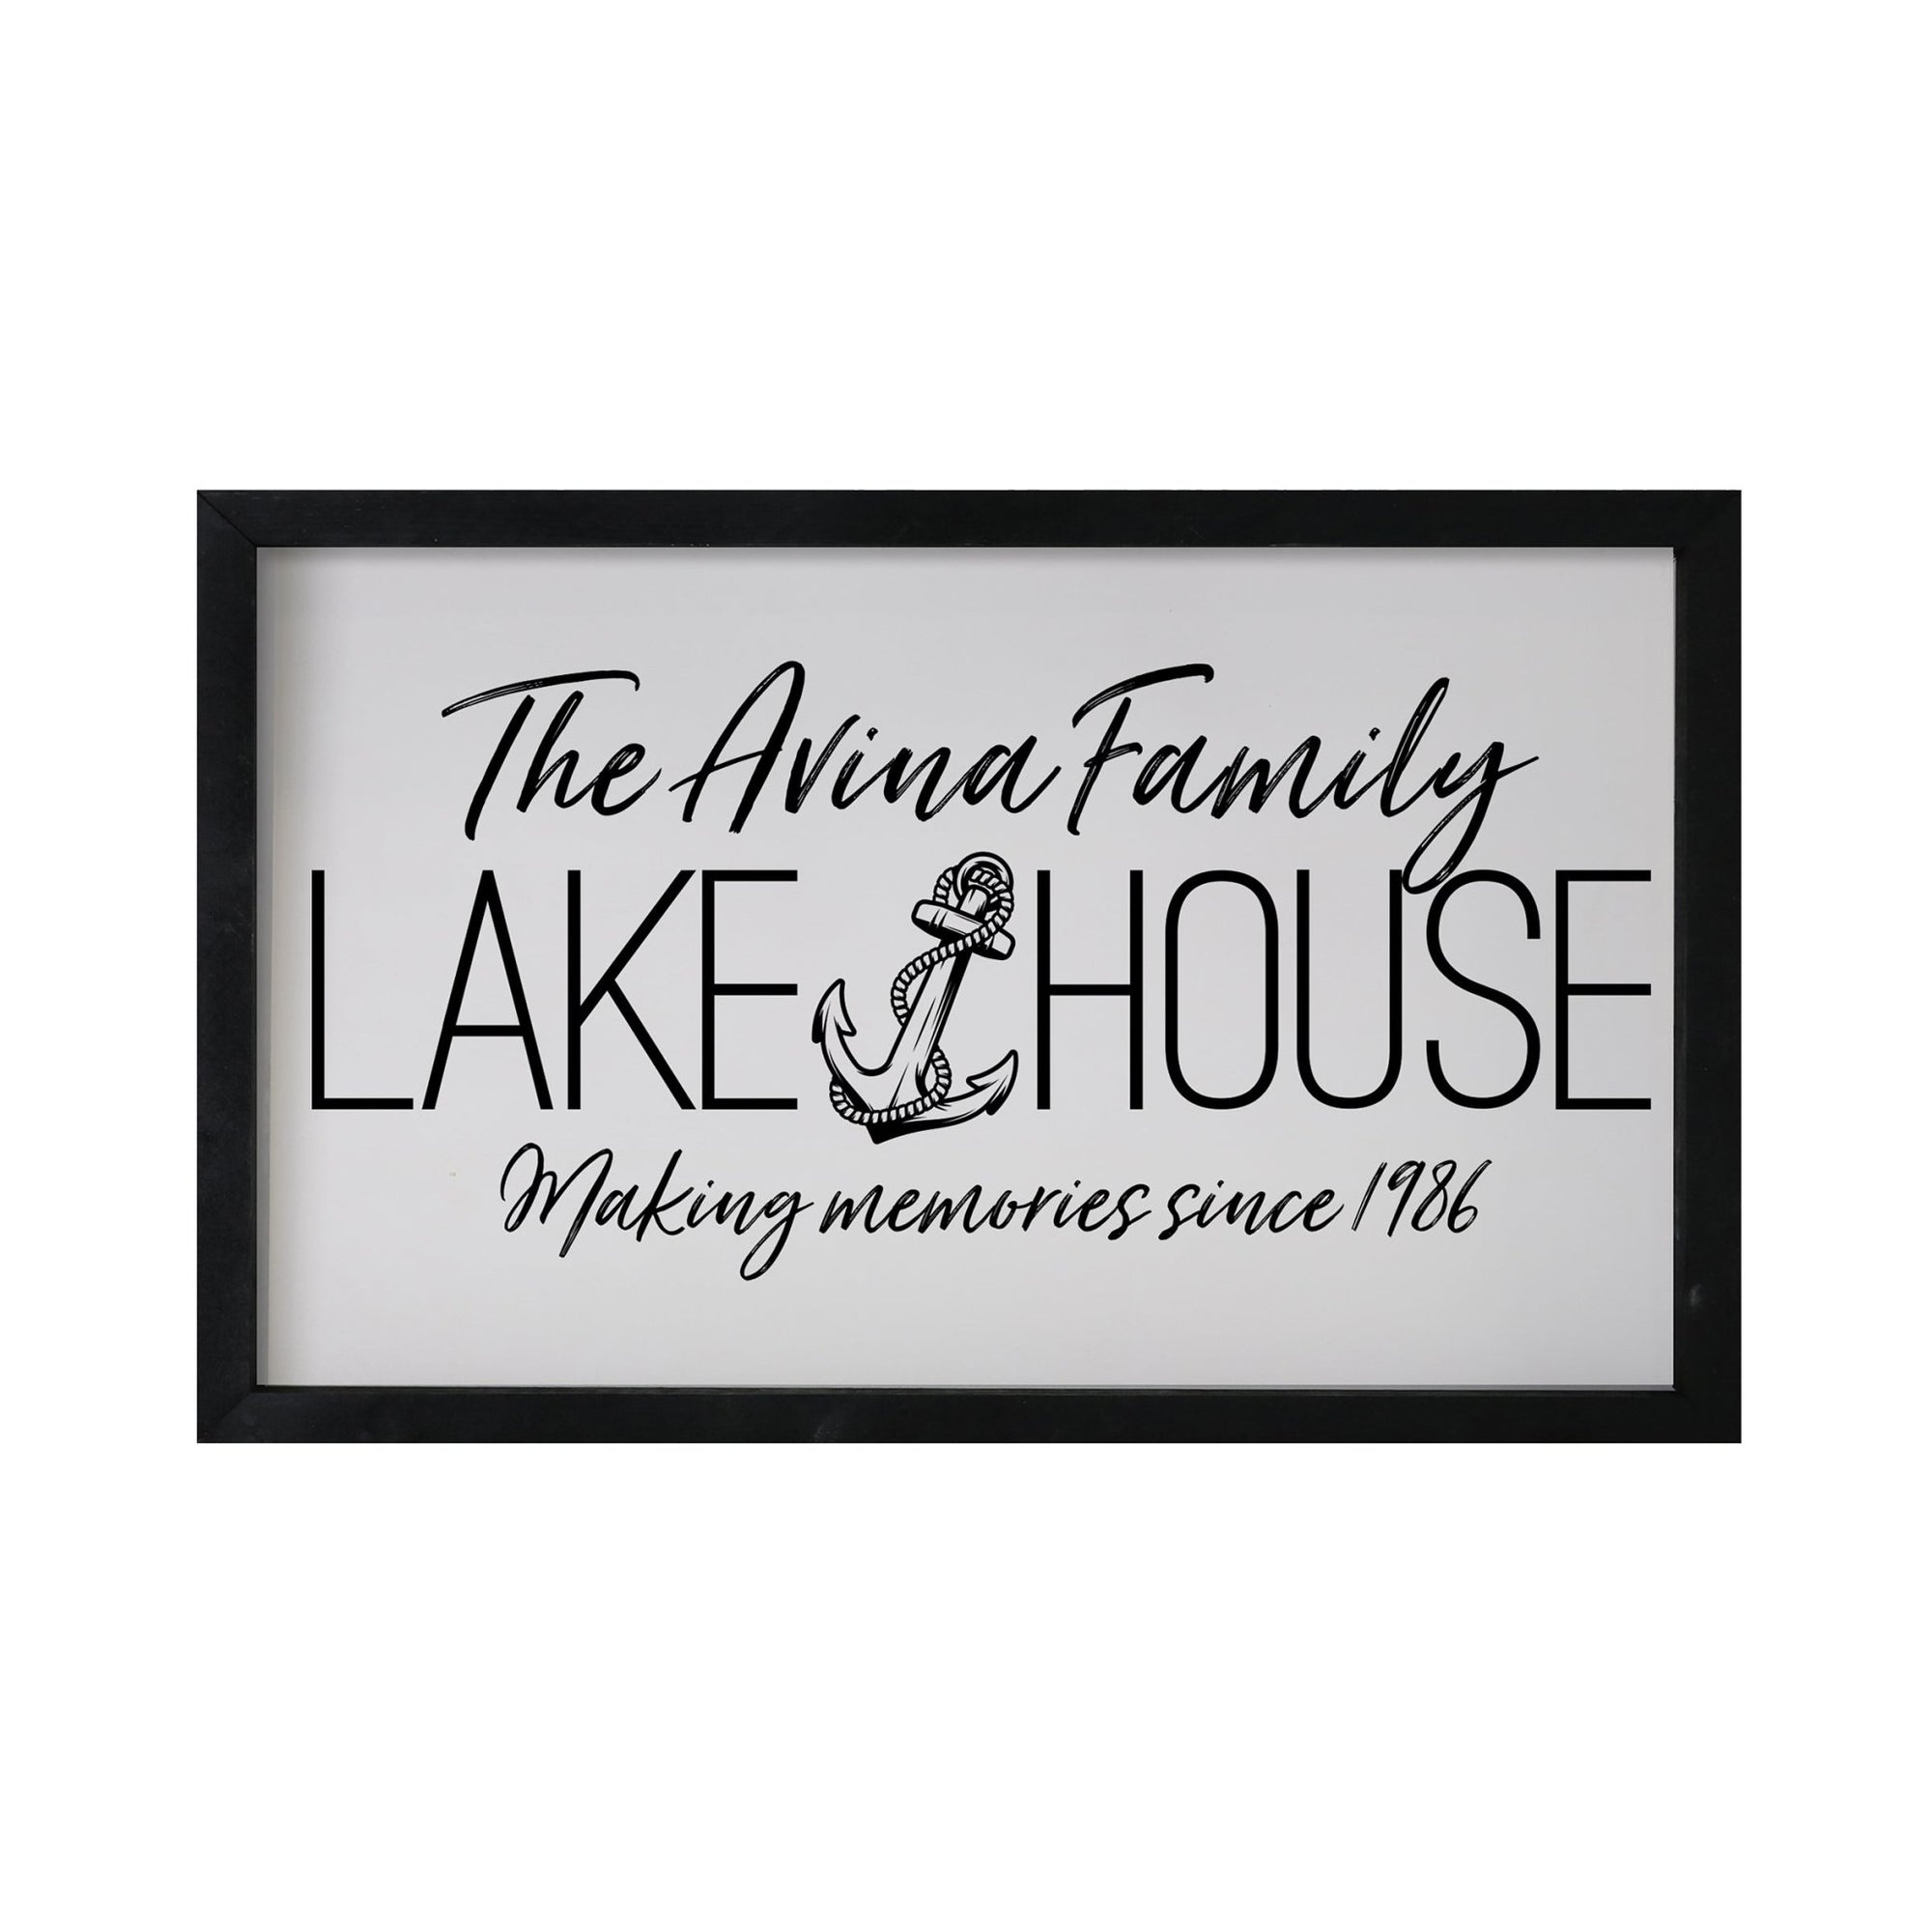 Inspirational Personalized Framed Shadow Box 12x18 - The Lake House Making Memories (Anchor) - LifeSong Milestones